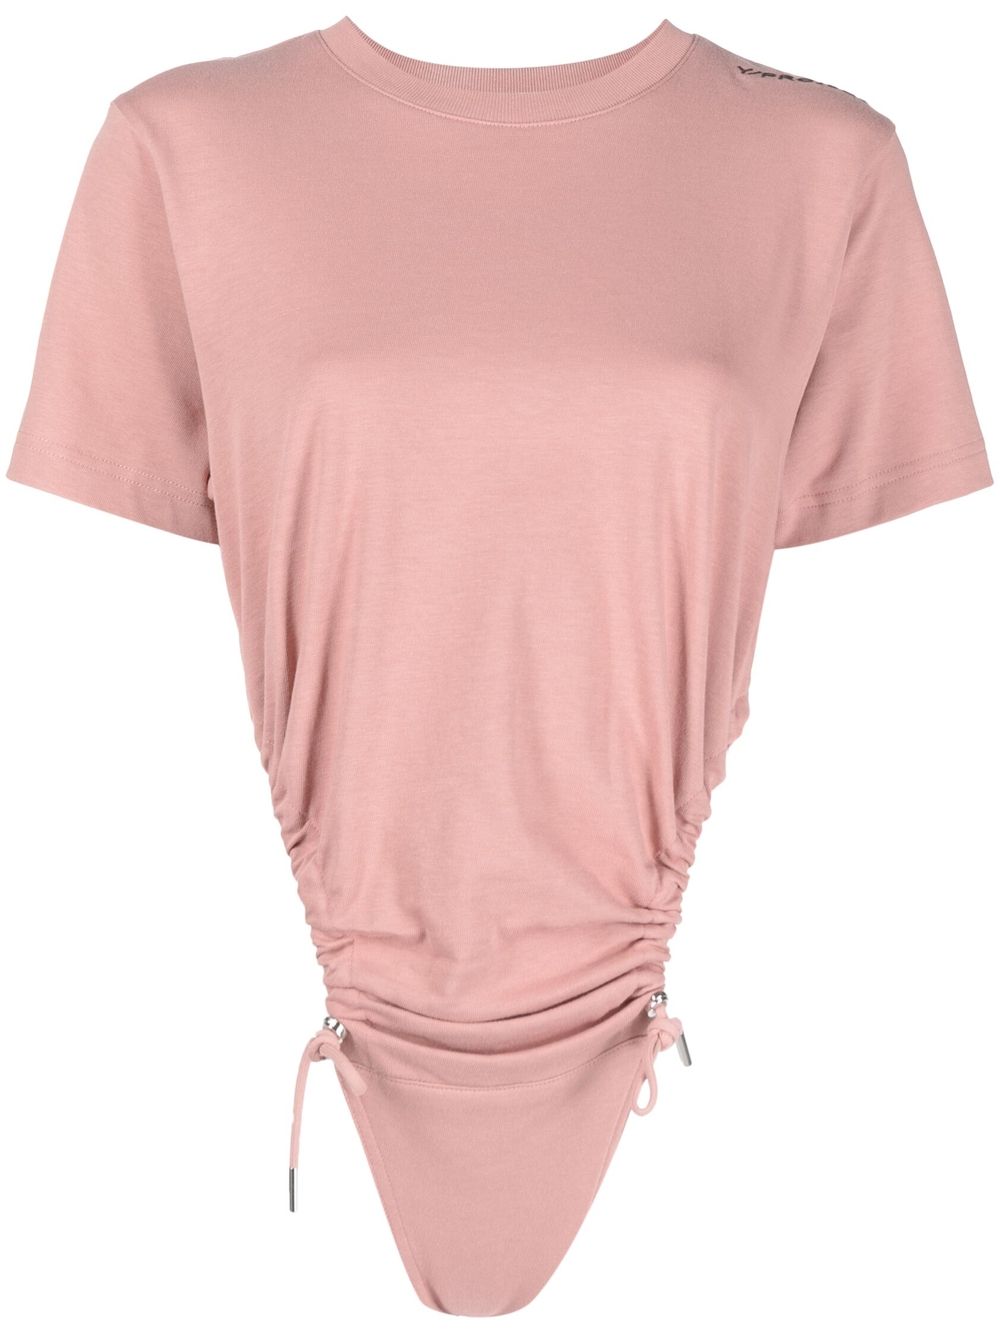 Y/Project cut-out detail body T-shirt - Pink von Y/Project